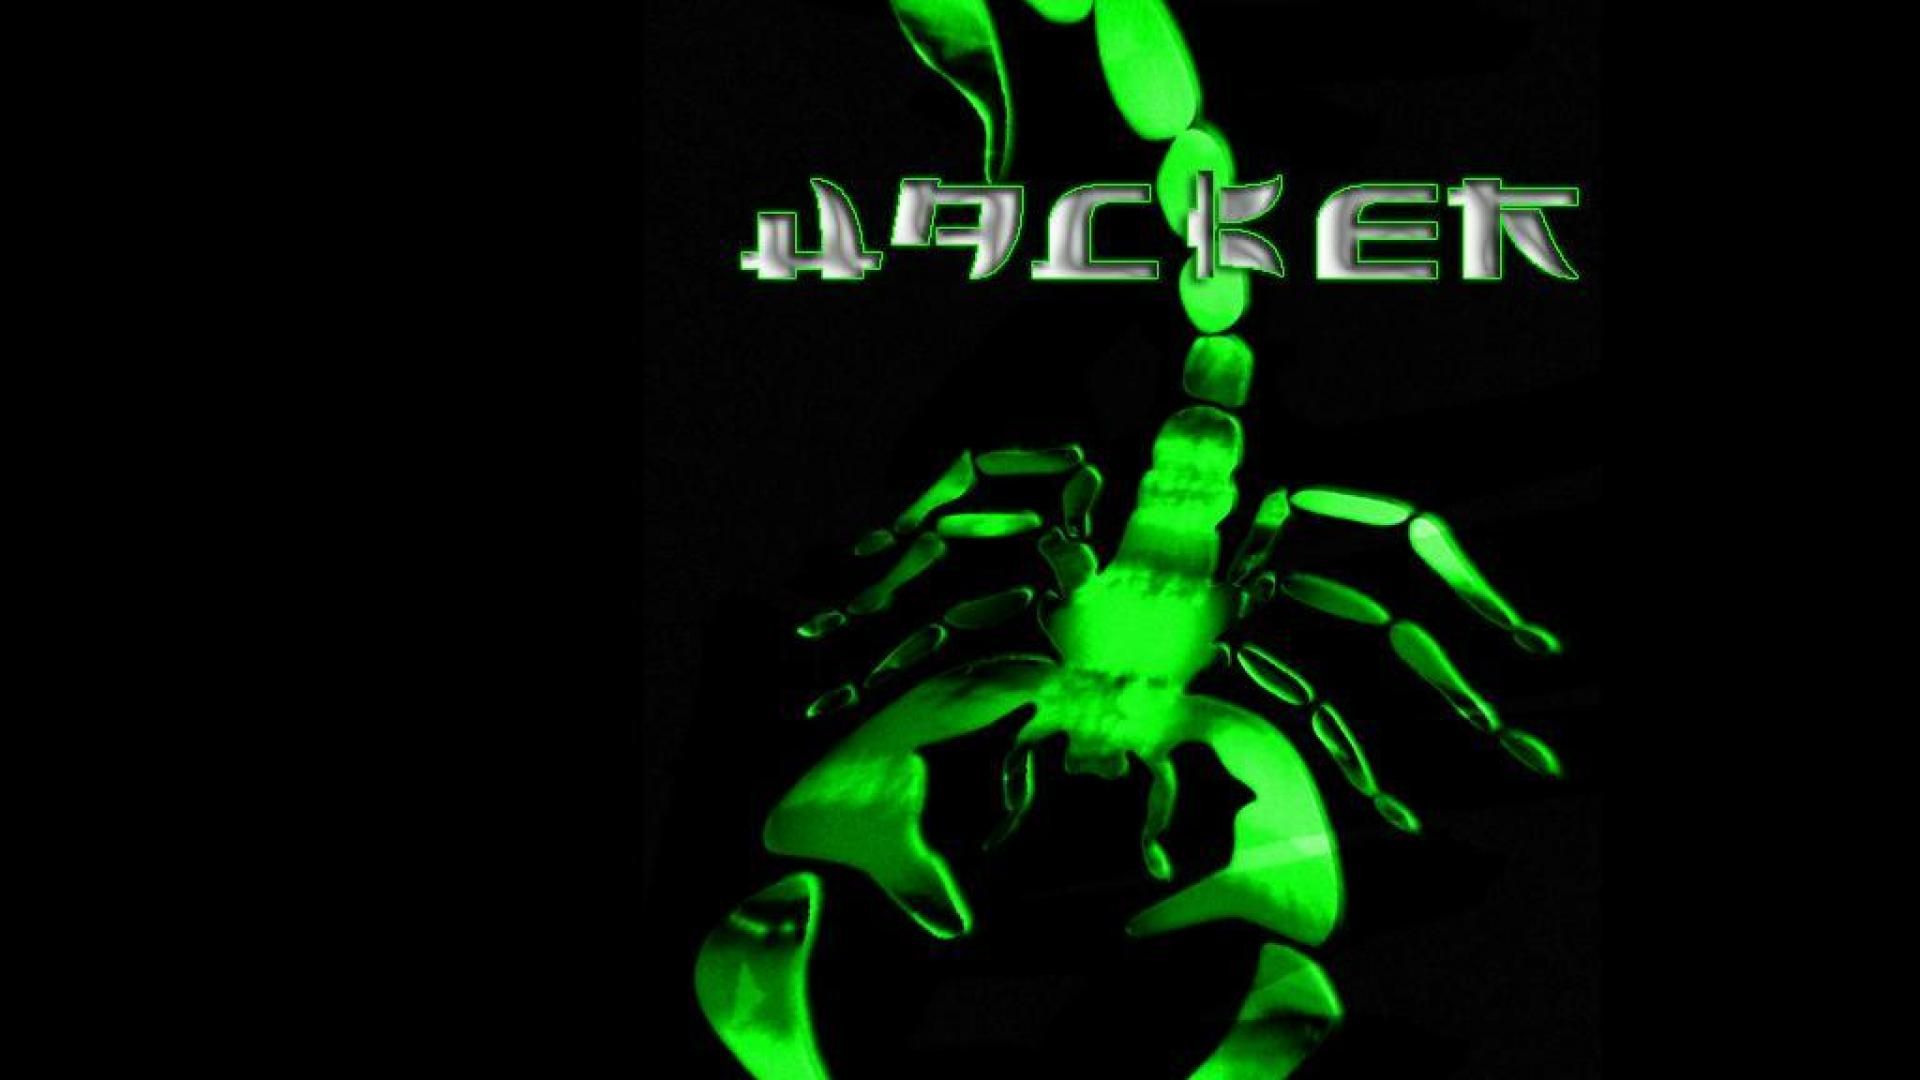 HD Wallpaper for Hackers. Hacks and Glitches Portal